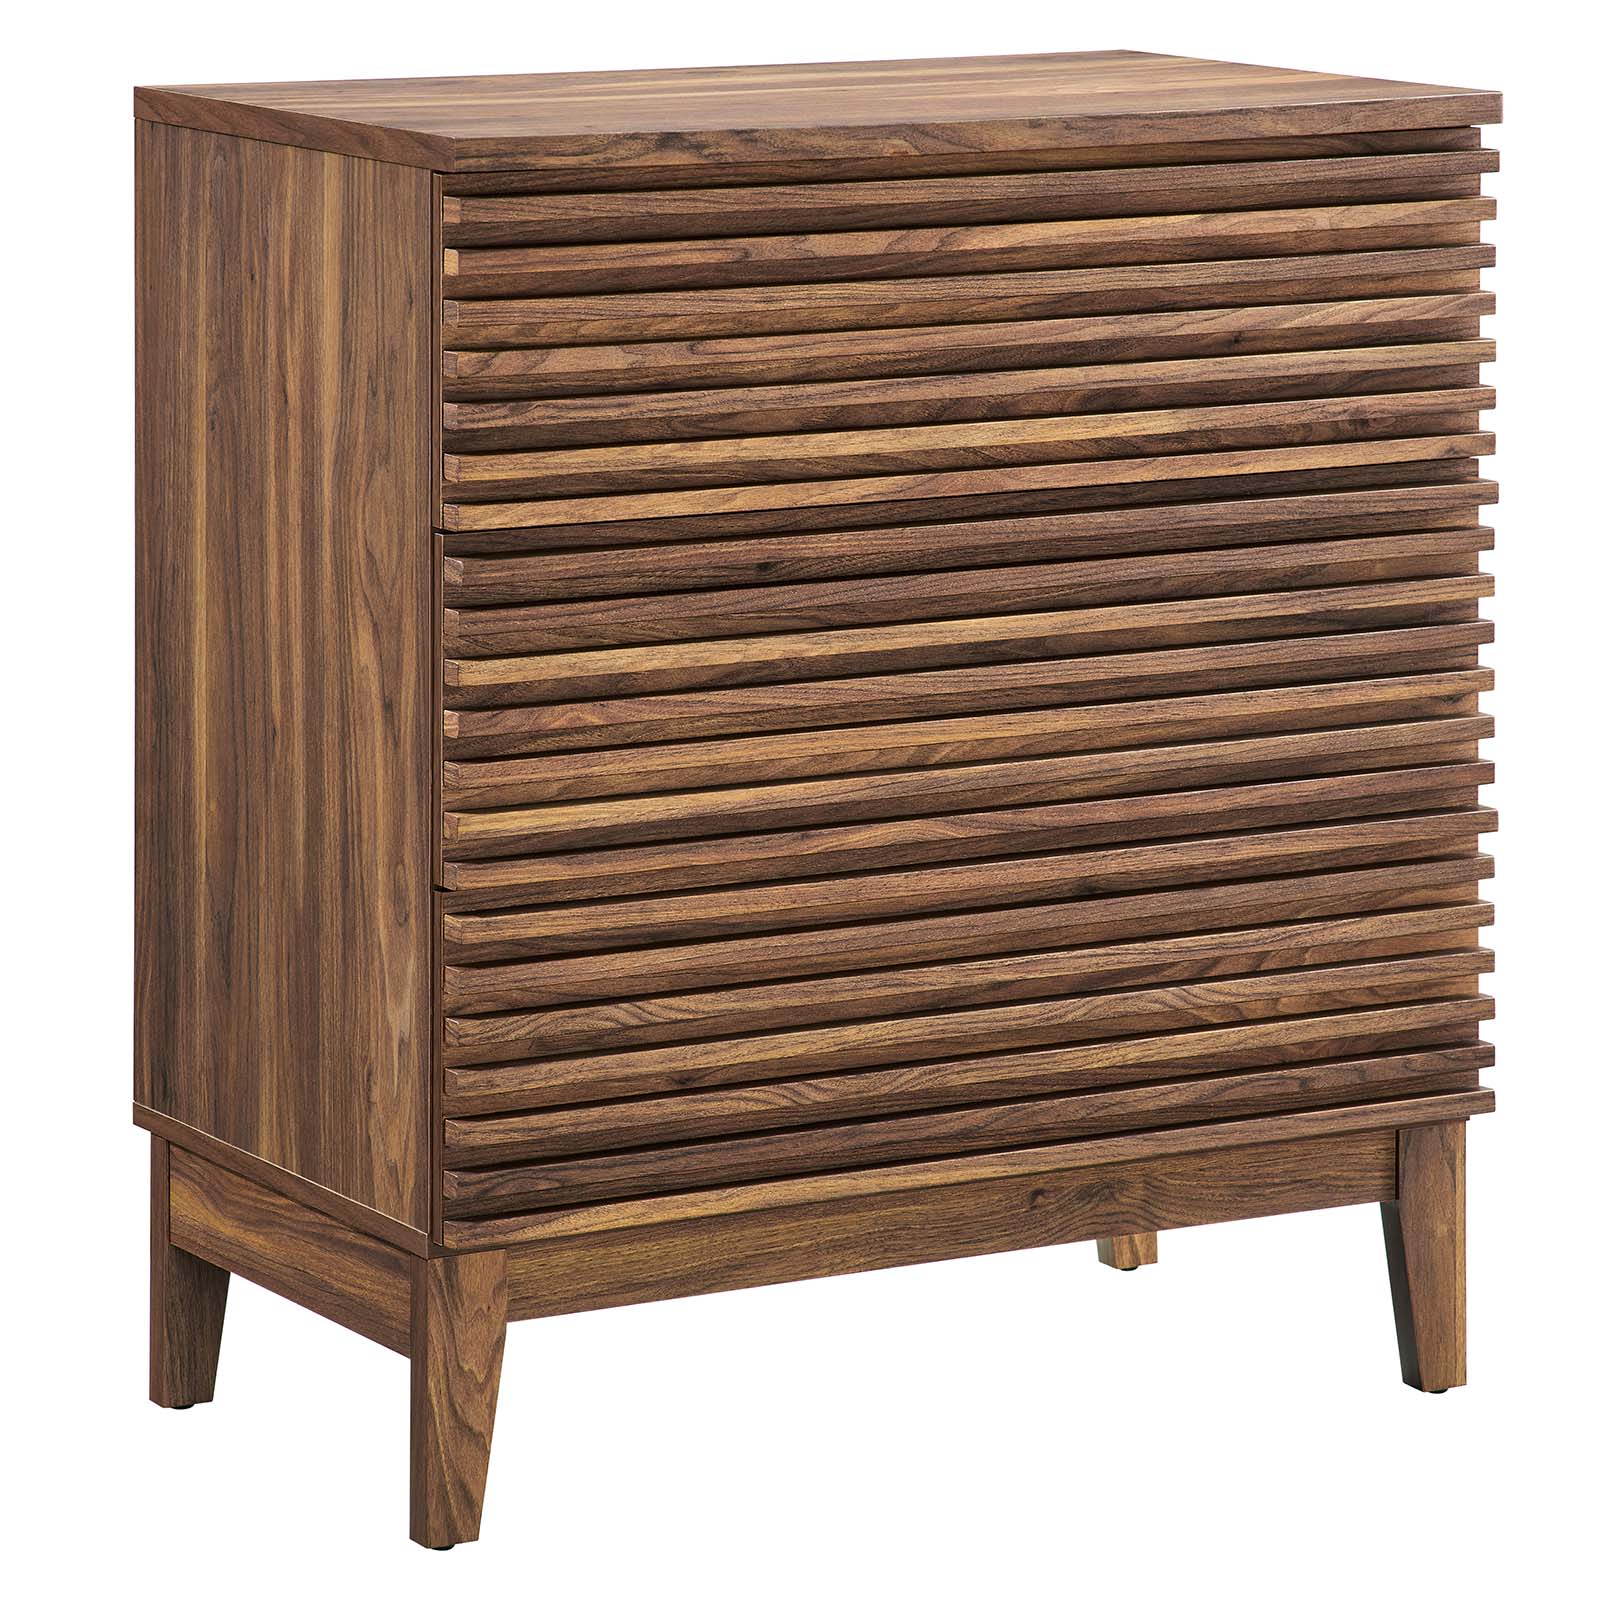 Modway Chest of Drawers - Render 3-Drawer Bachelor'S Chest Walnut